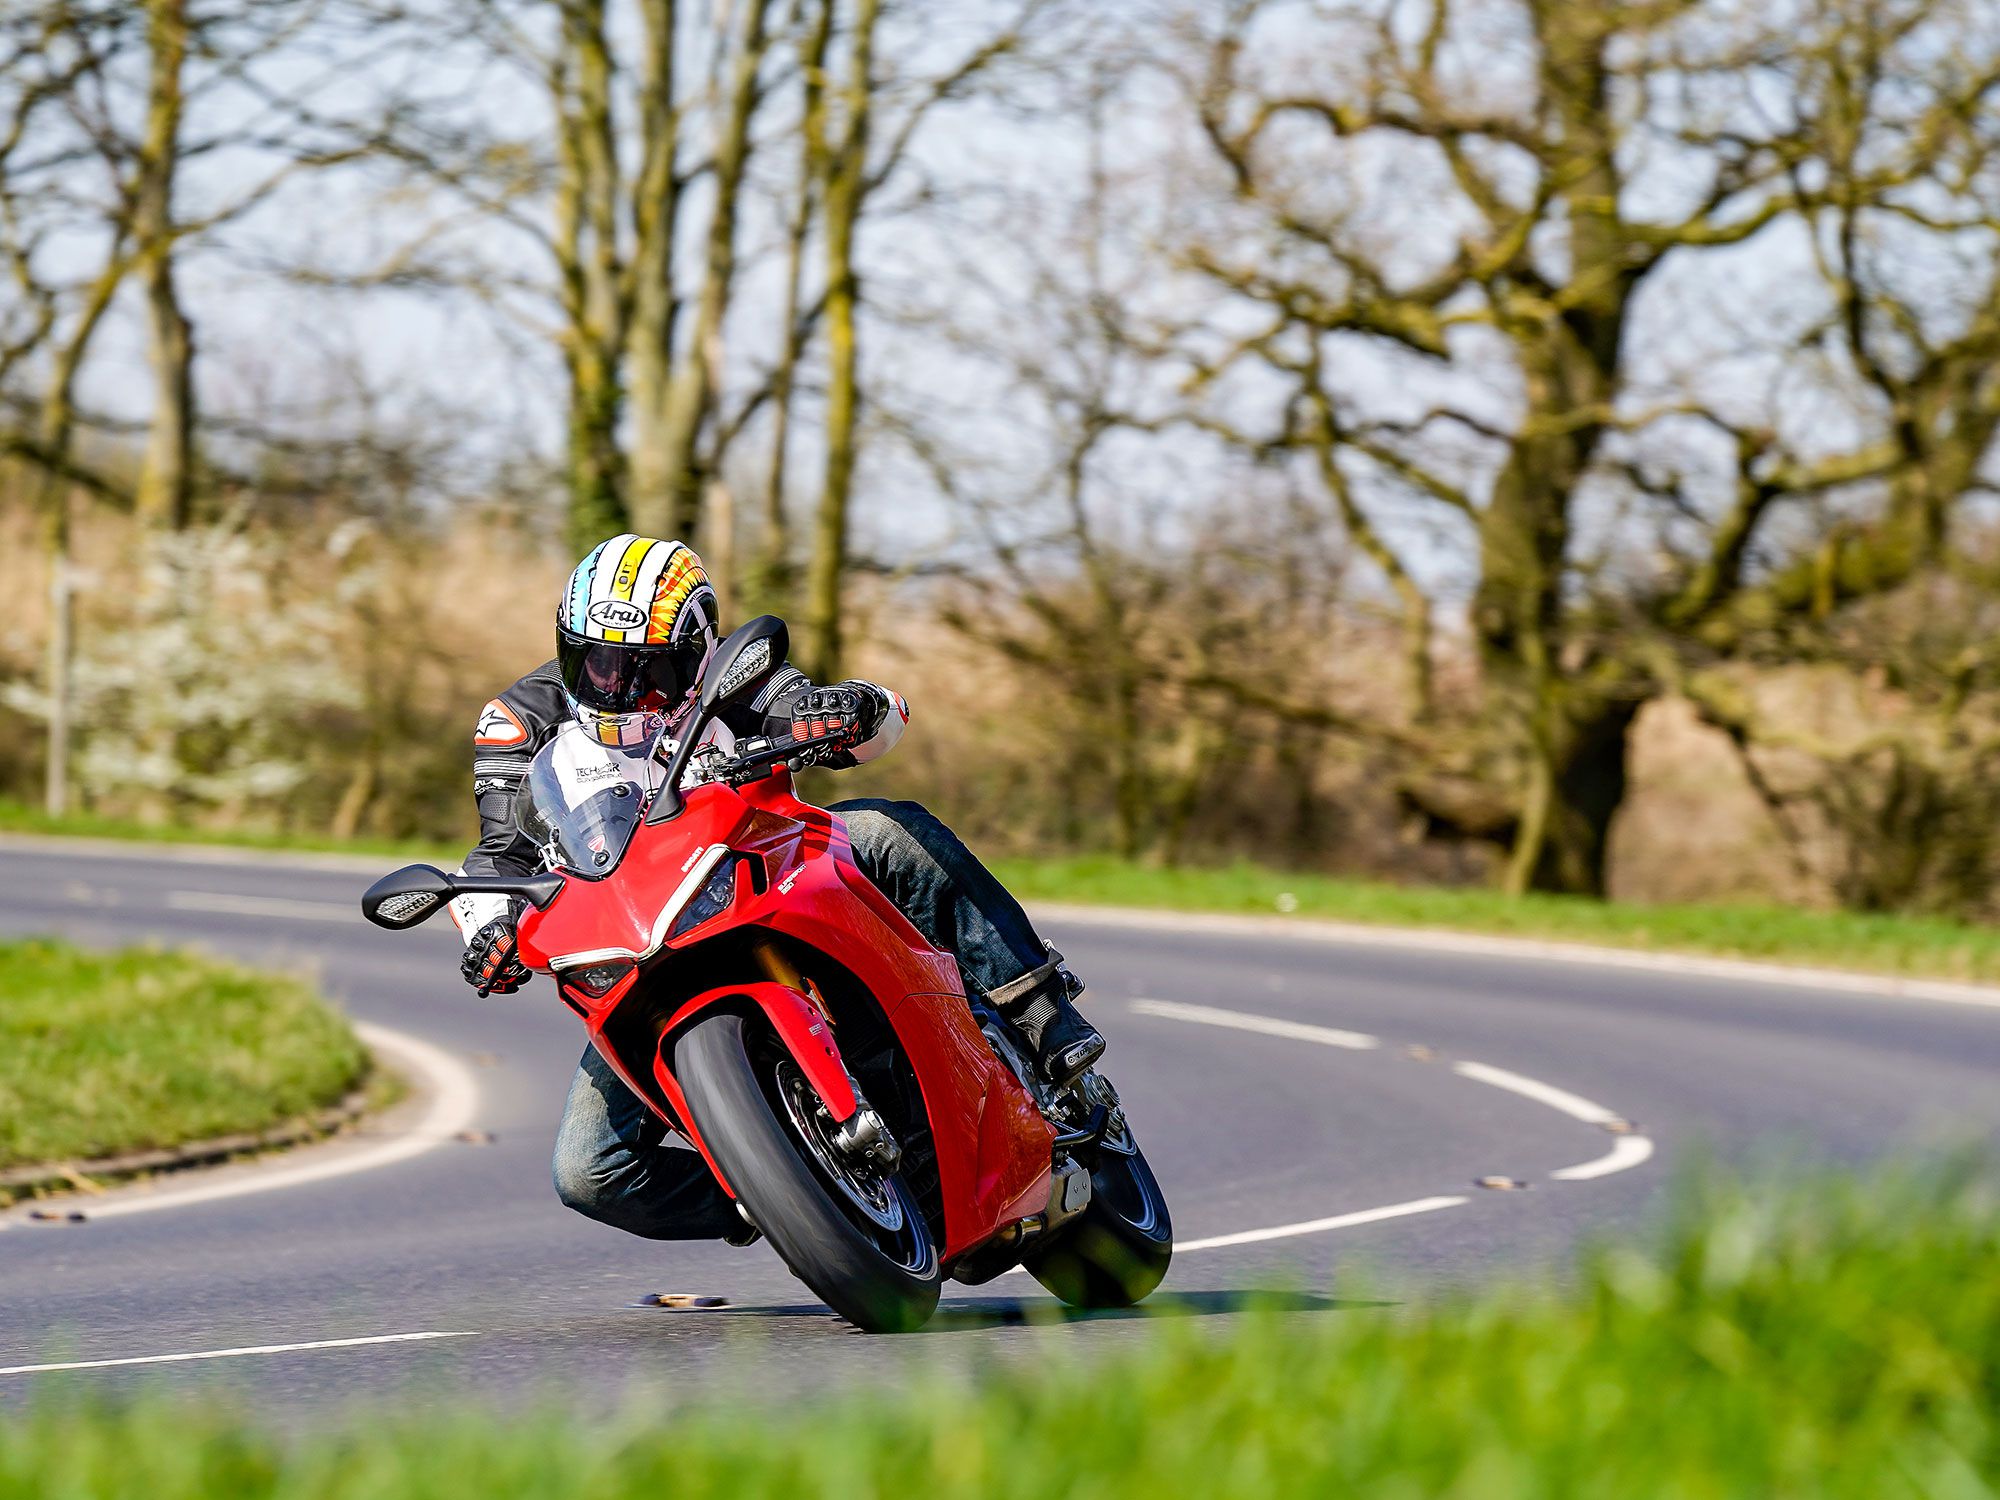 Think of the SuperSport as a practical sportbike capable of touring and commuting that can also take on the track with knee-dragging fun, whilst making you feel special every time you open the garage door.